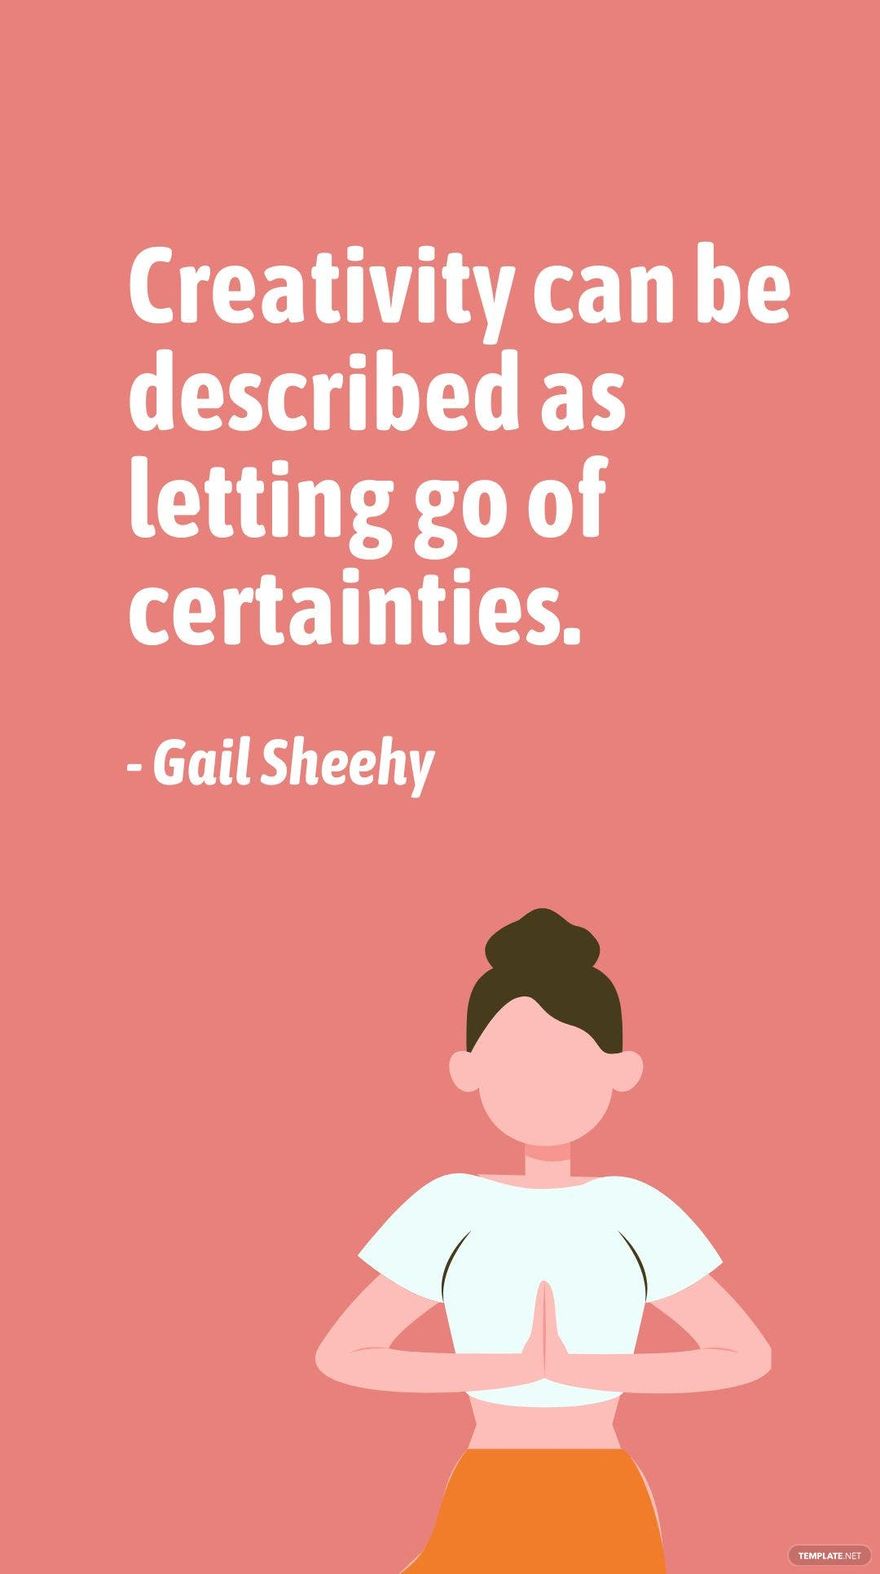 Gail Sheehy - Creativity can be described as letting go of certainties.